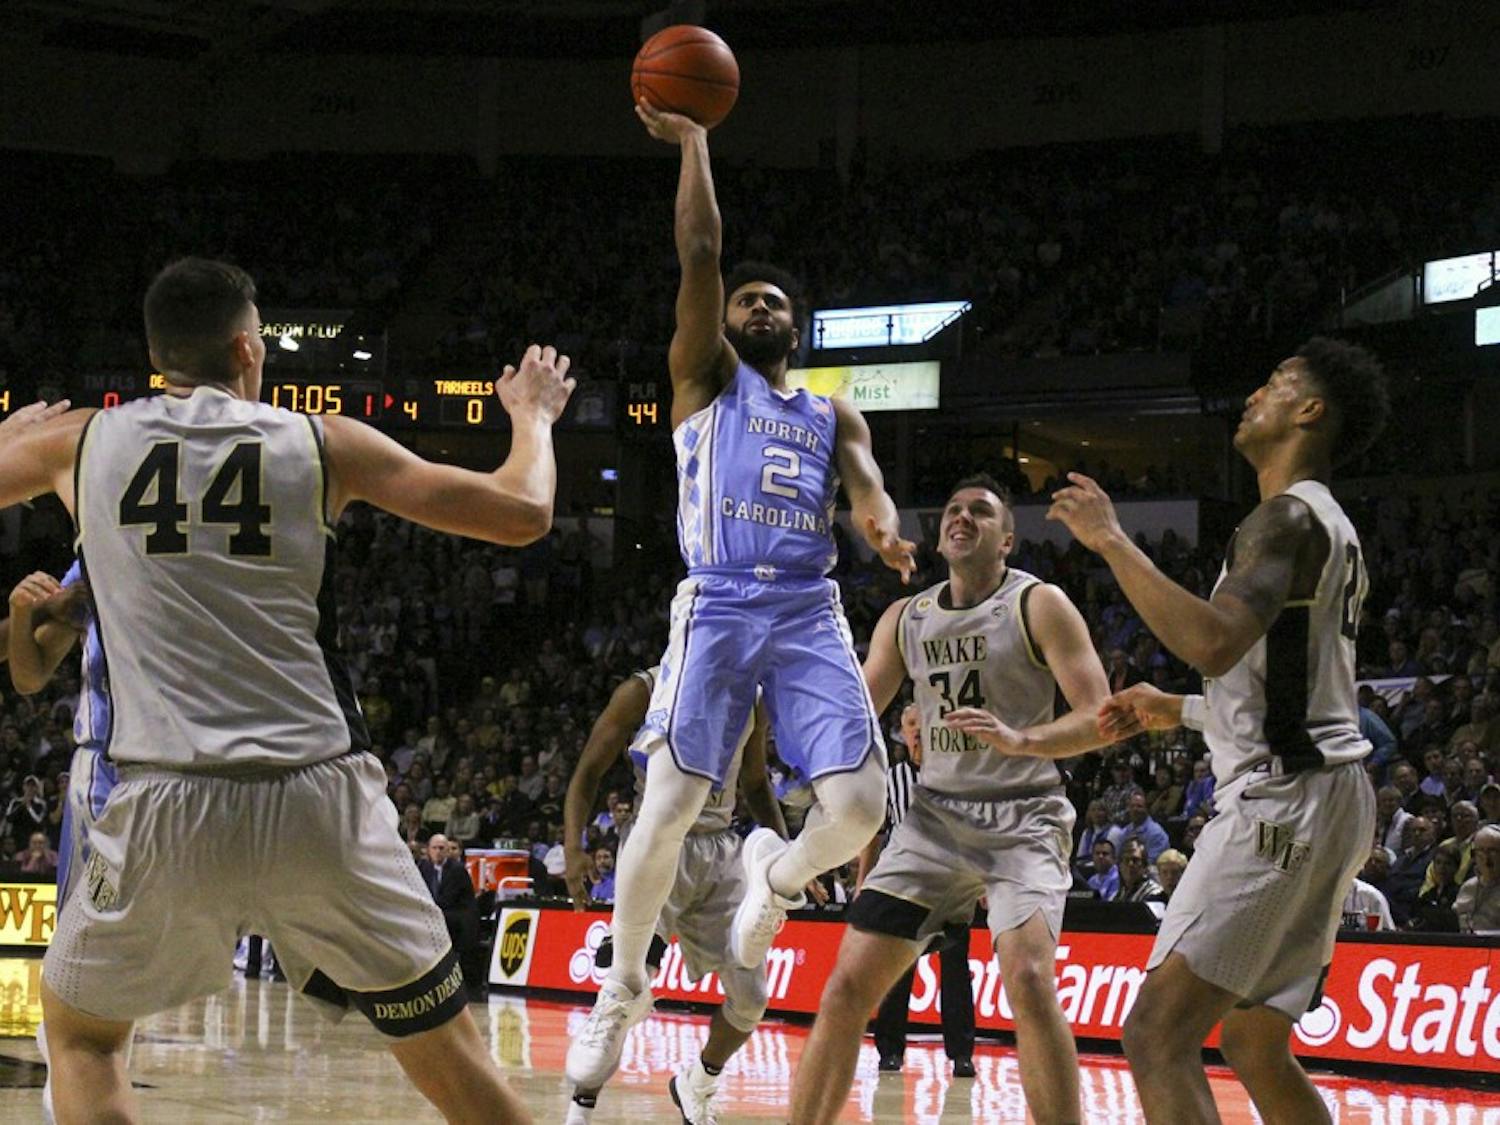 The Tar Heels defeated Wake Forest 93-87 at the Lawrence Joel Veterans Memorial Coliseum in Winston-Salem Wednesday evening. 